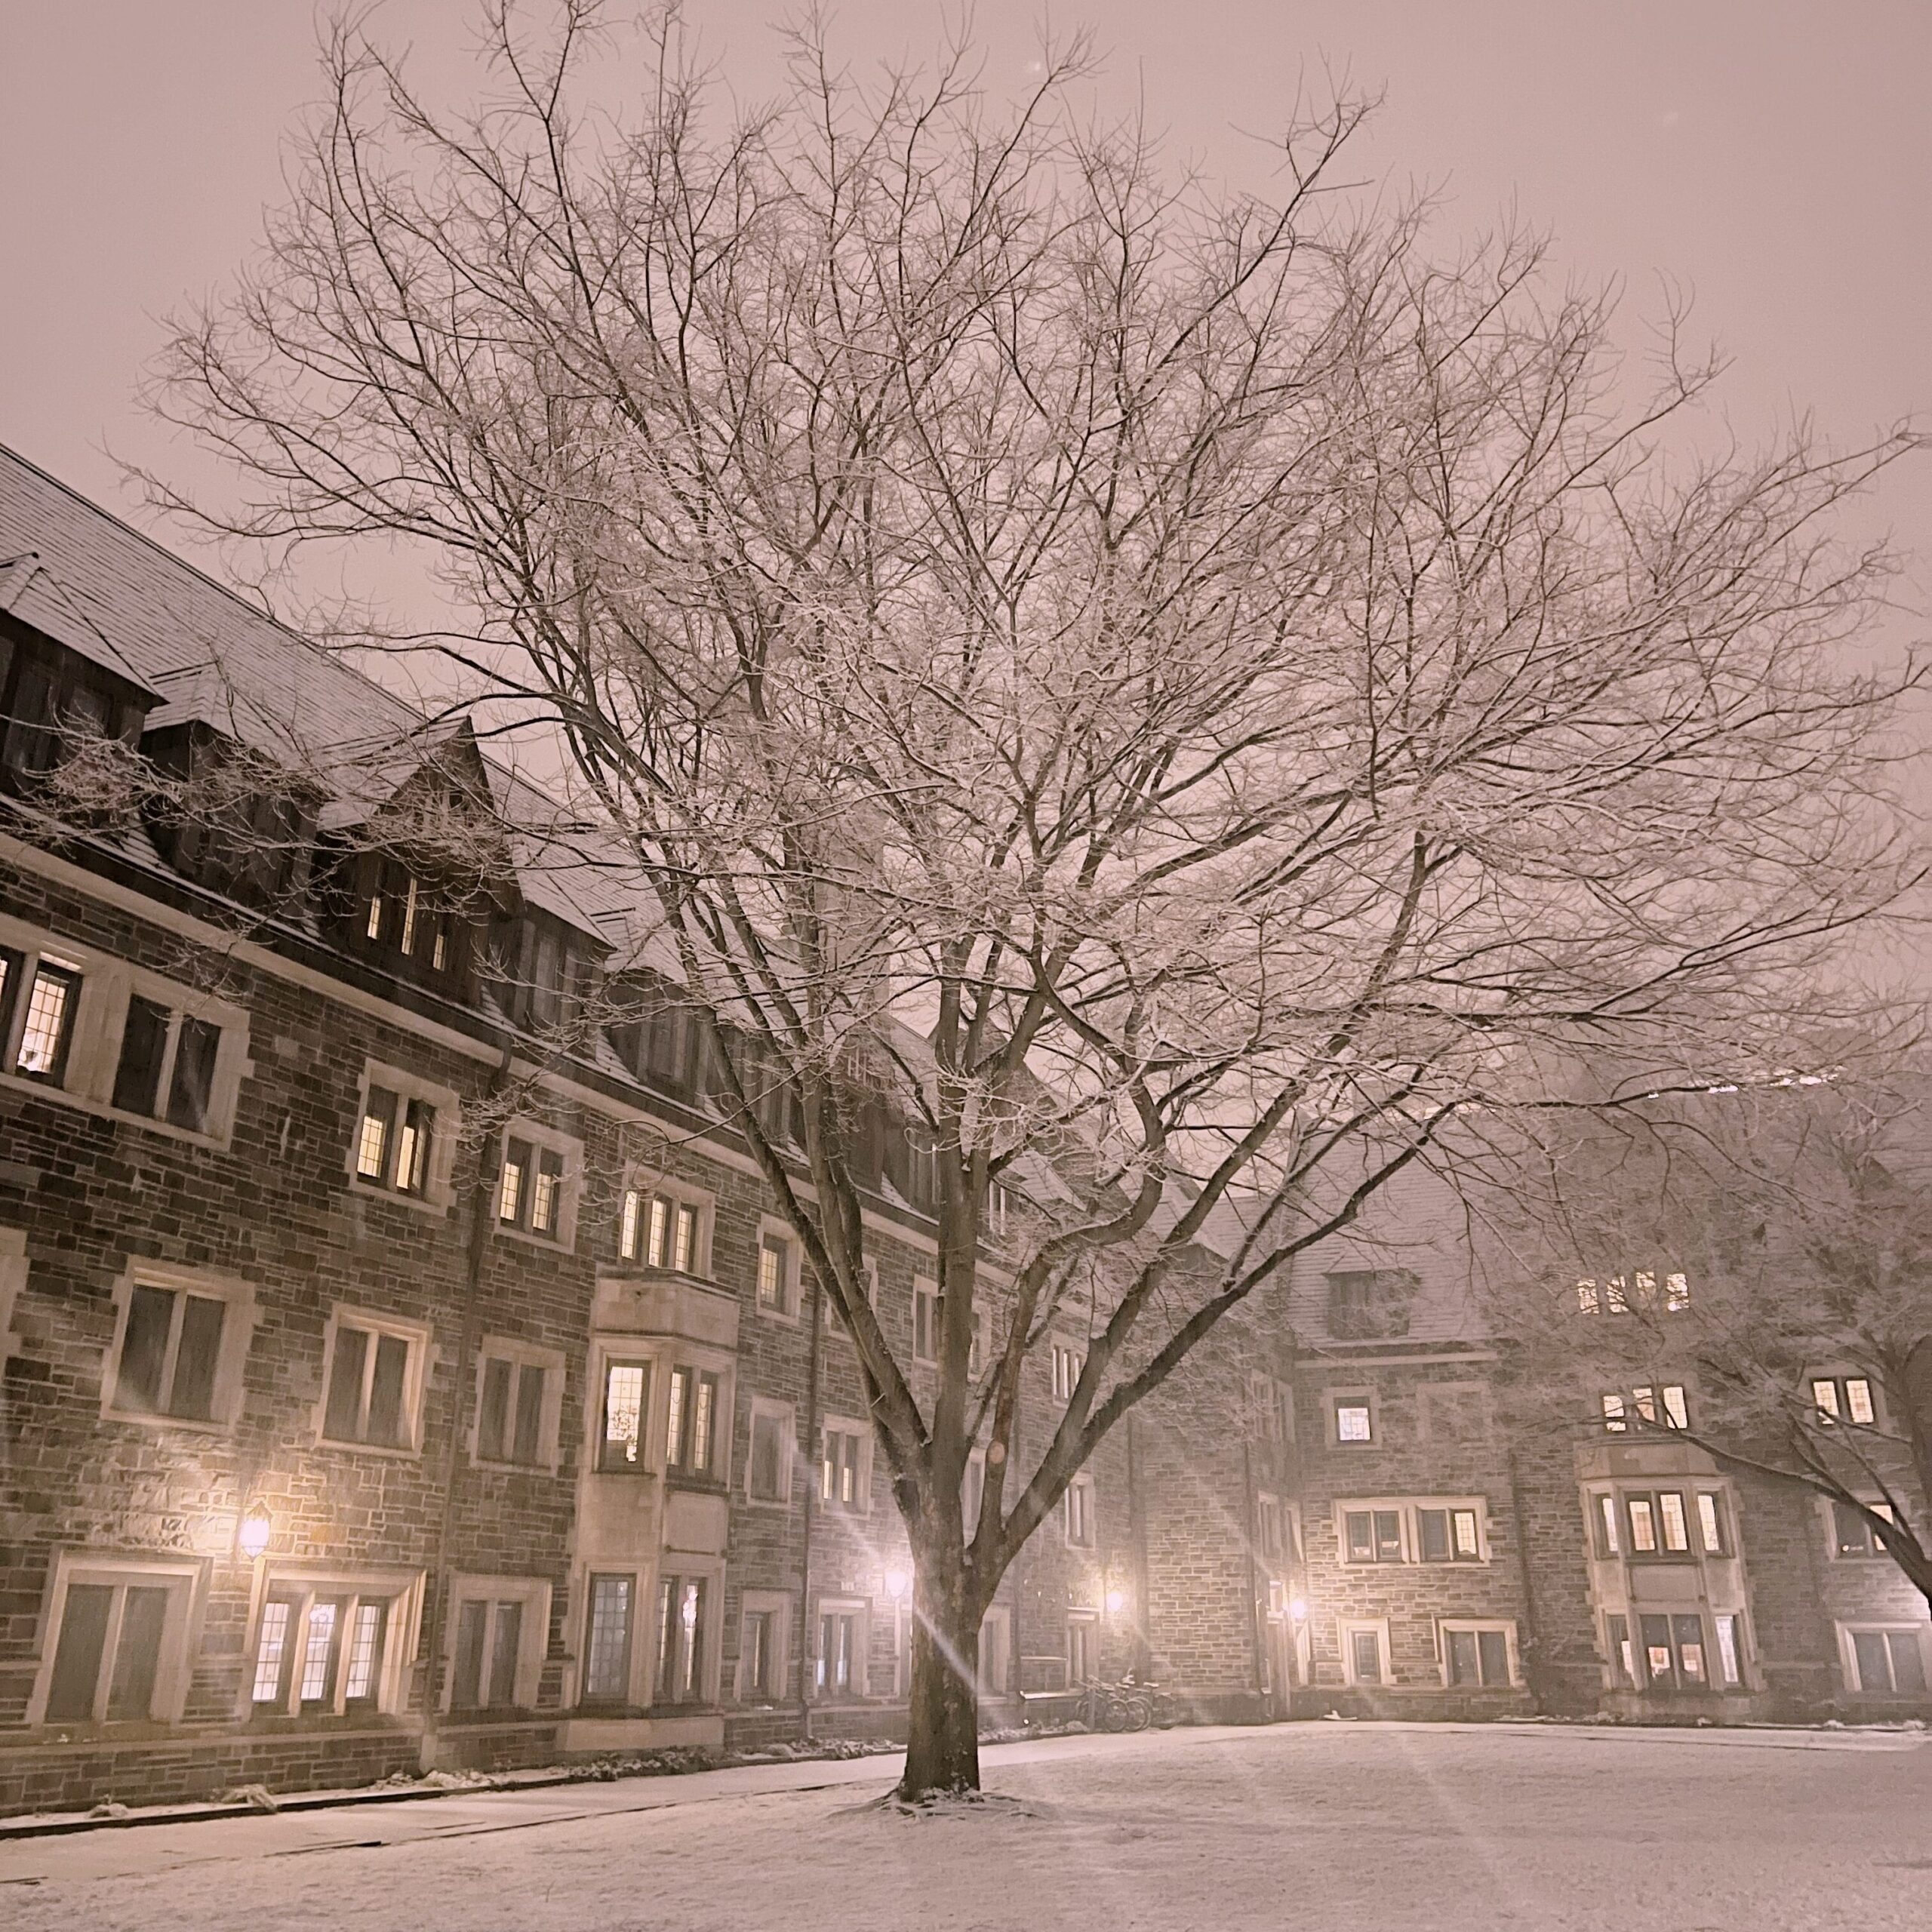 Princeton building at night with light snow. Tree in center of frame and lights casting a glare